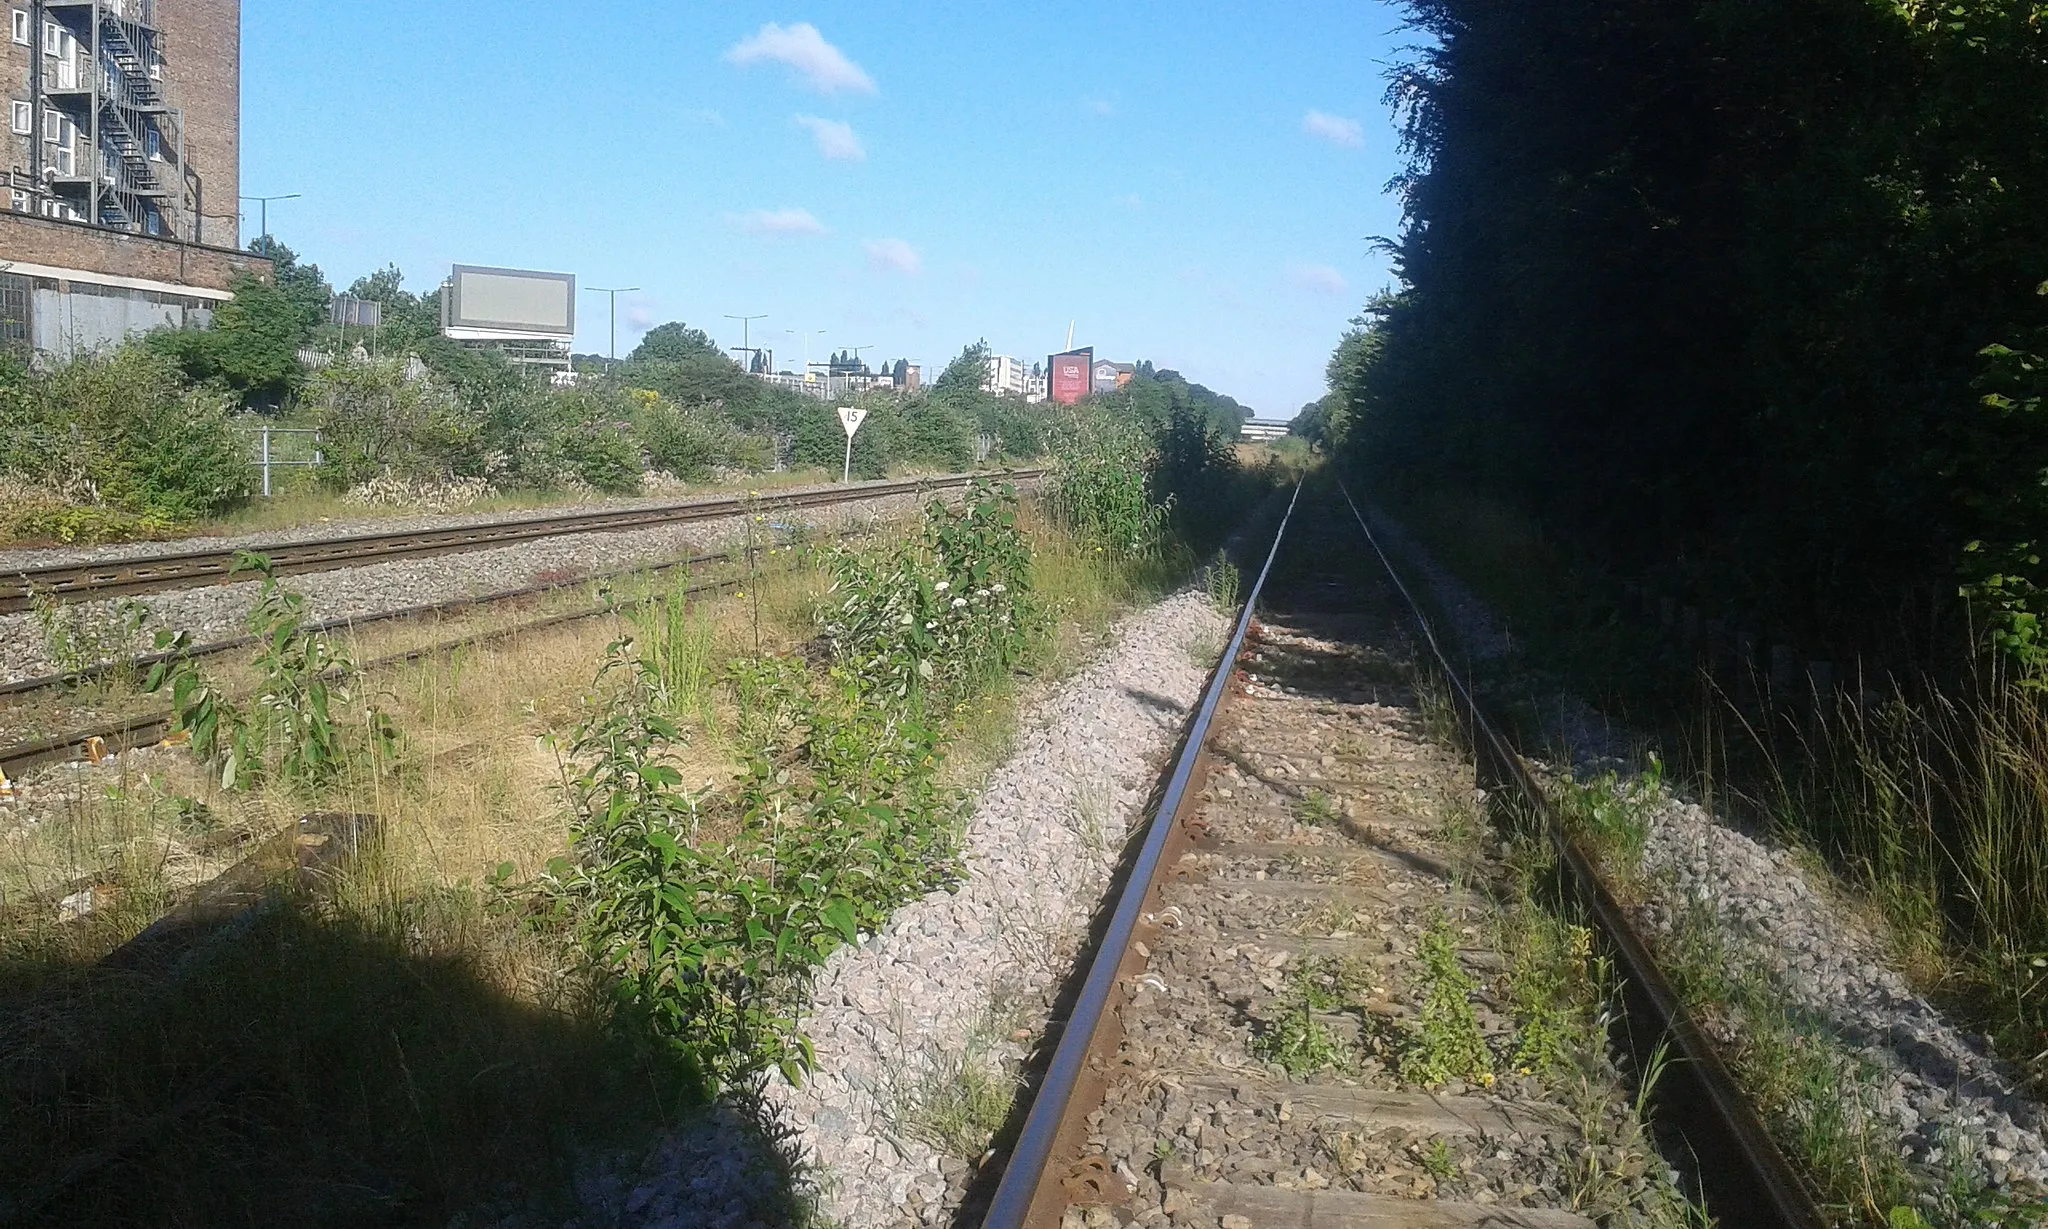 Photo showing: Former Guinness Brewery sidings at Park Royal on 14th July 2016. The sidings are now used to supply aggregate material to Lagarde Tarmac.